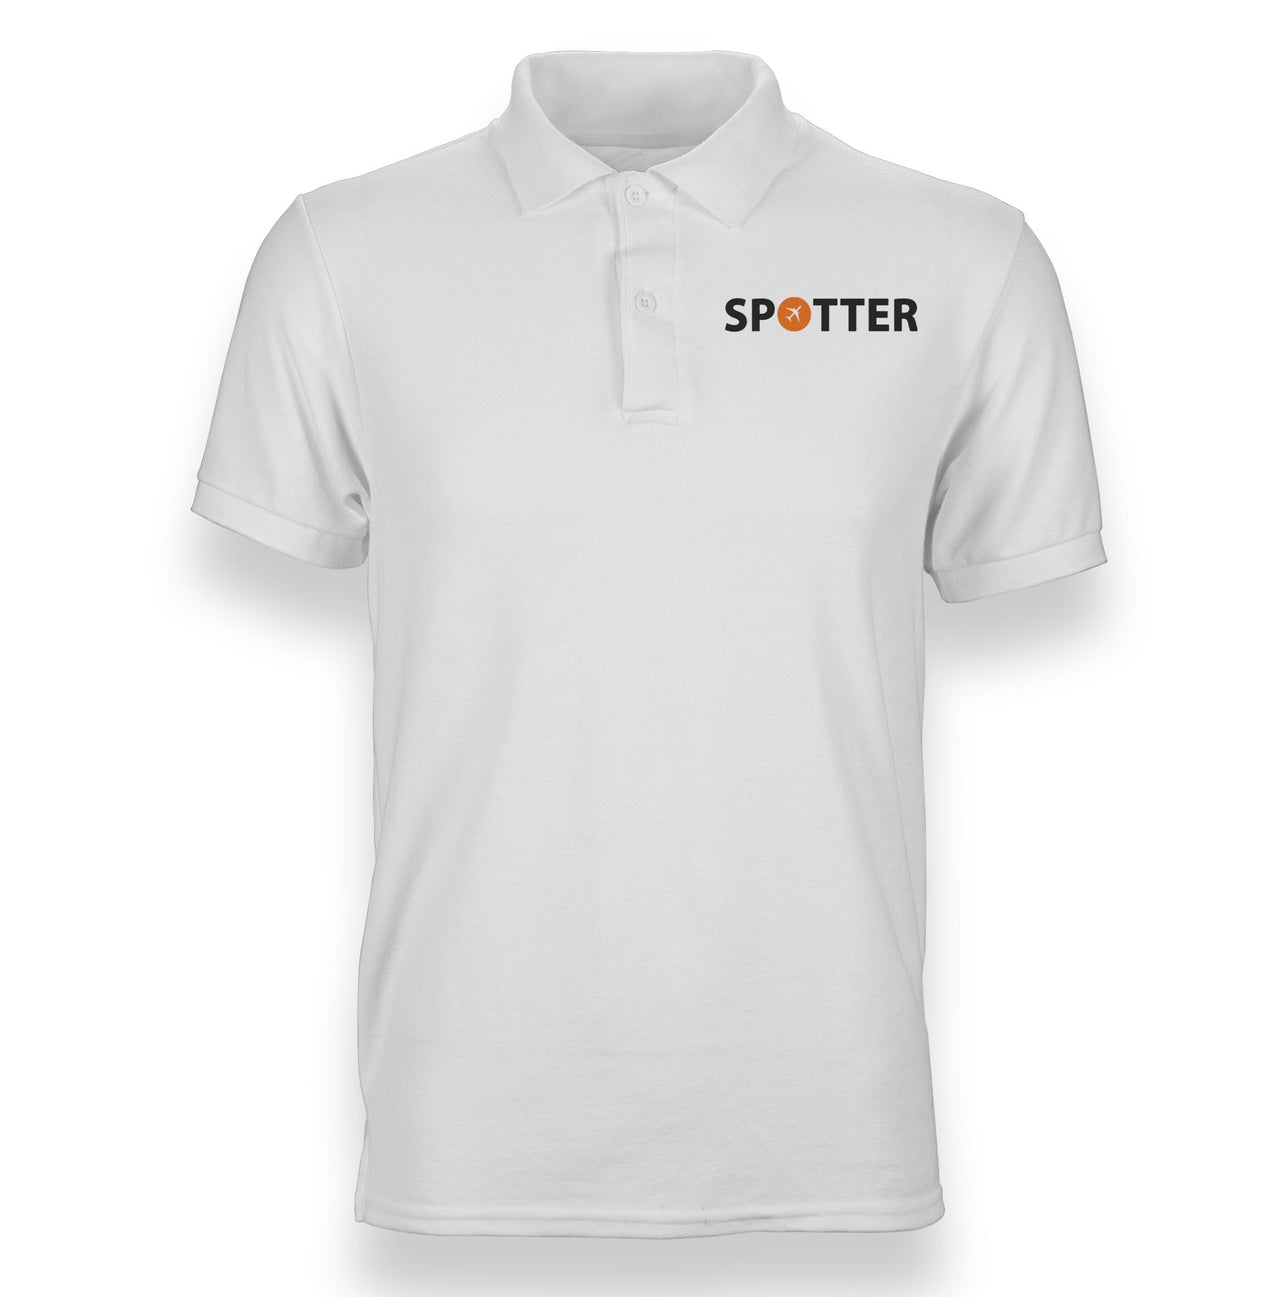 Spotter Designed Polo T-Shirts